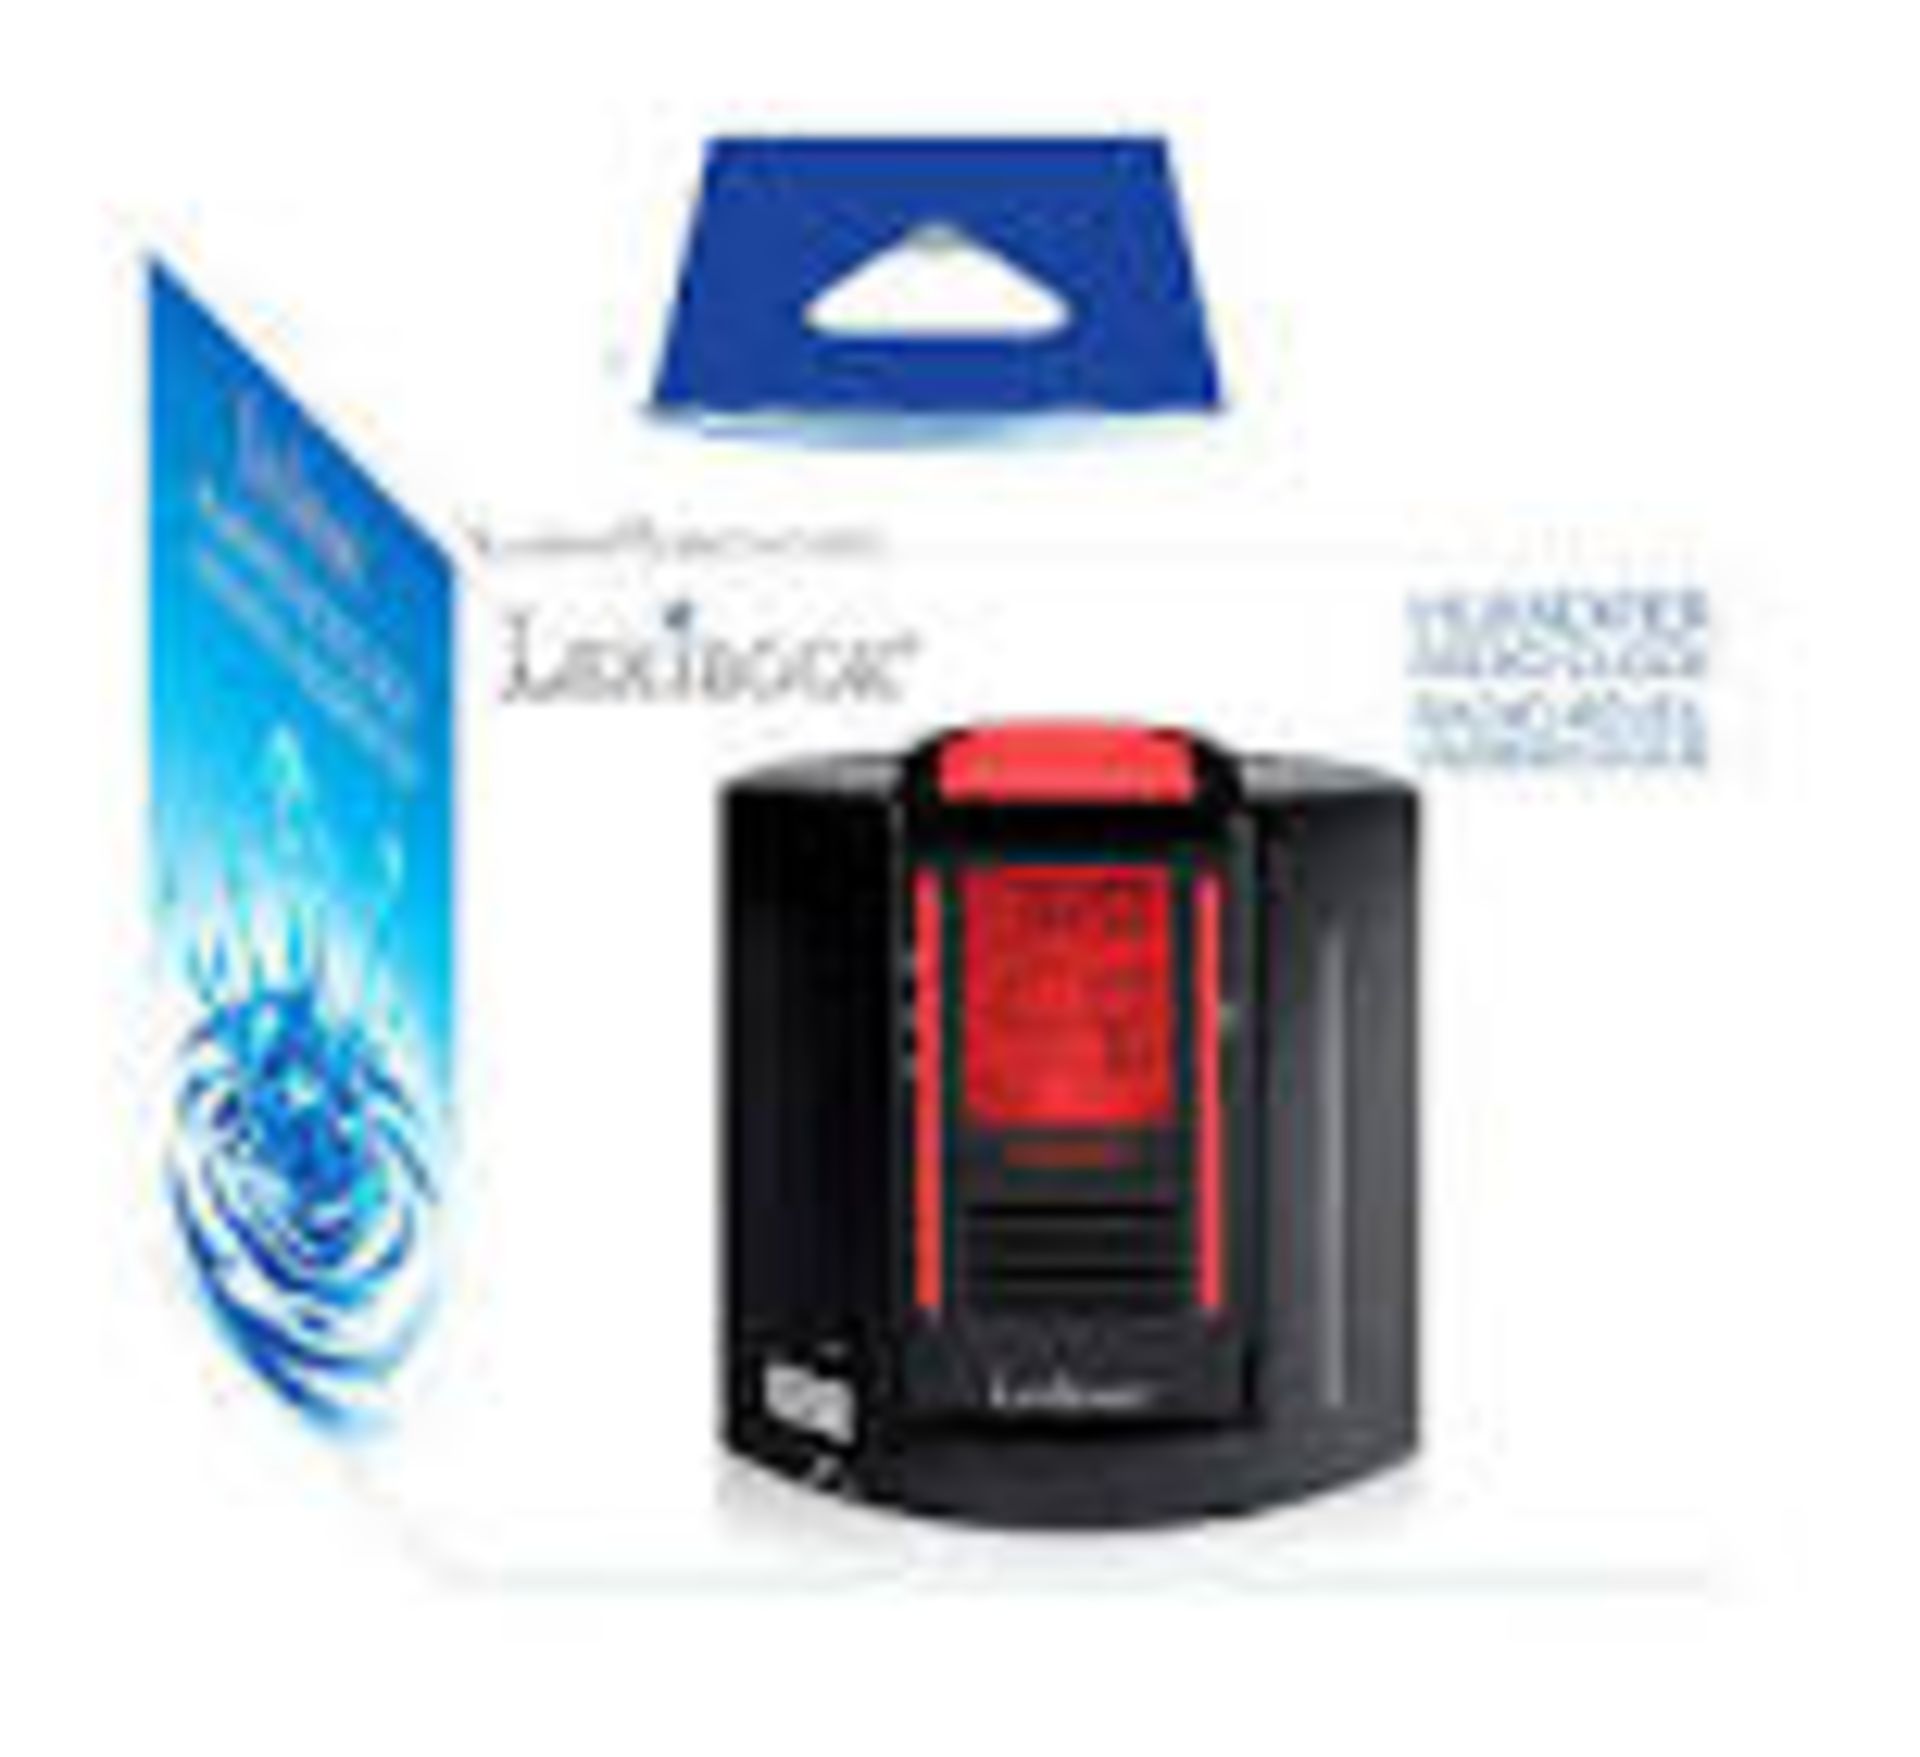 10 x Lexbook Digital Radio and Humidifier Set - Image 8 of 8